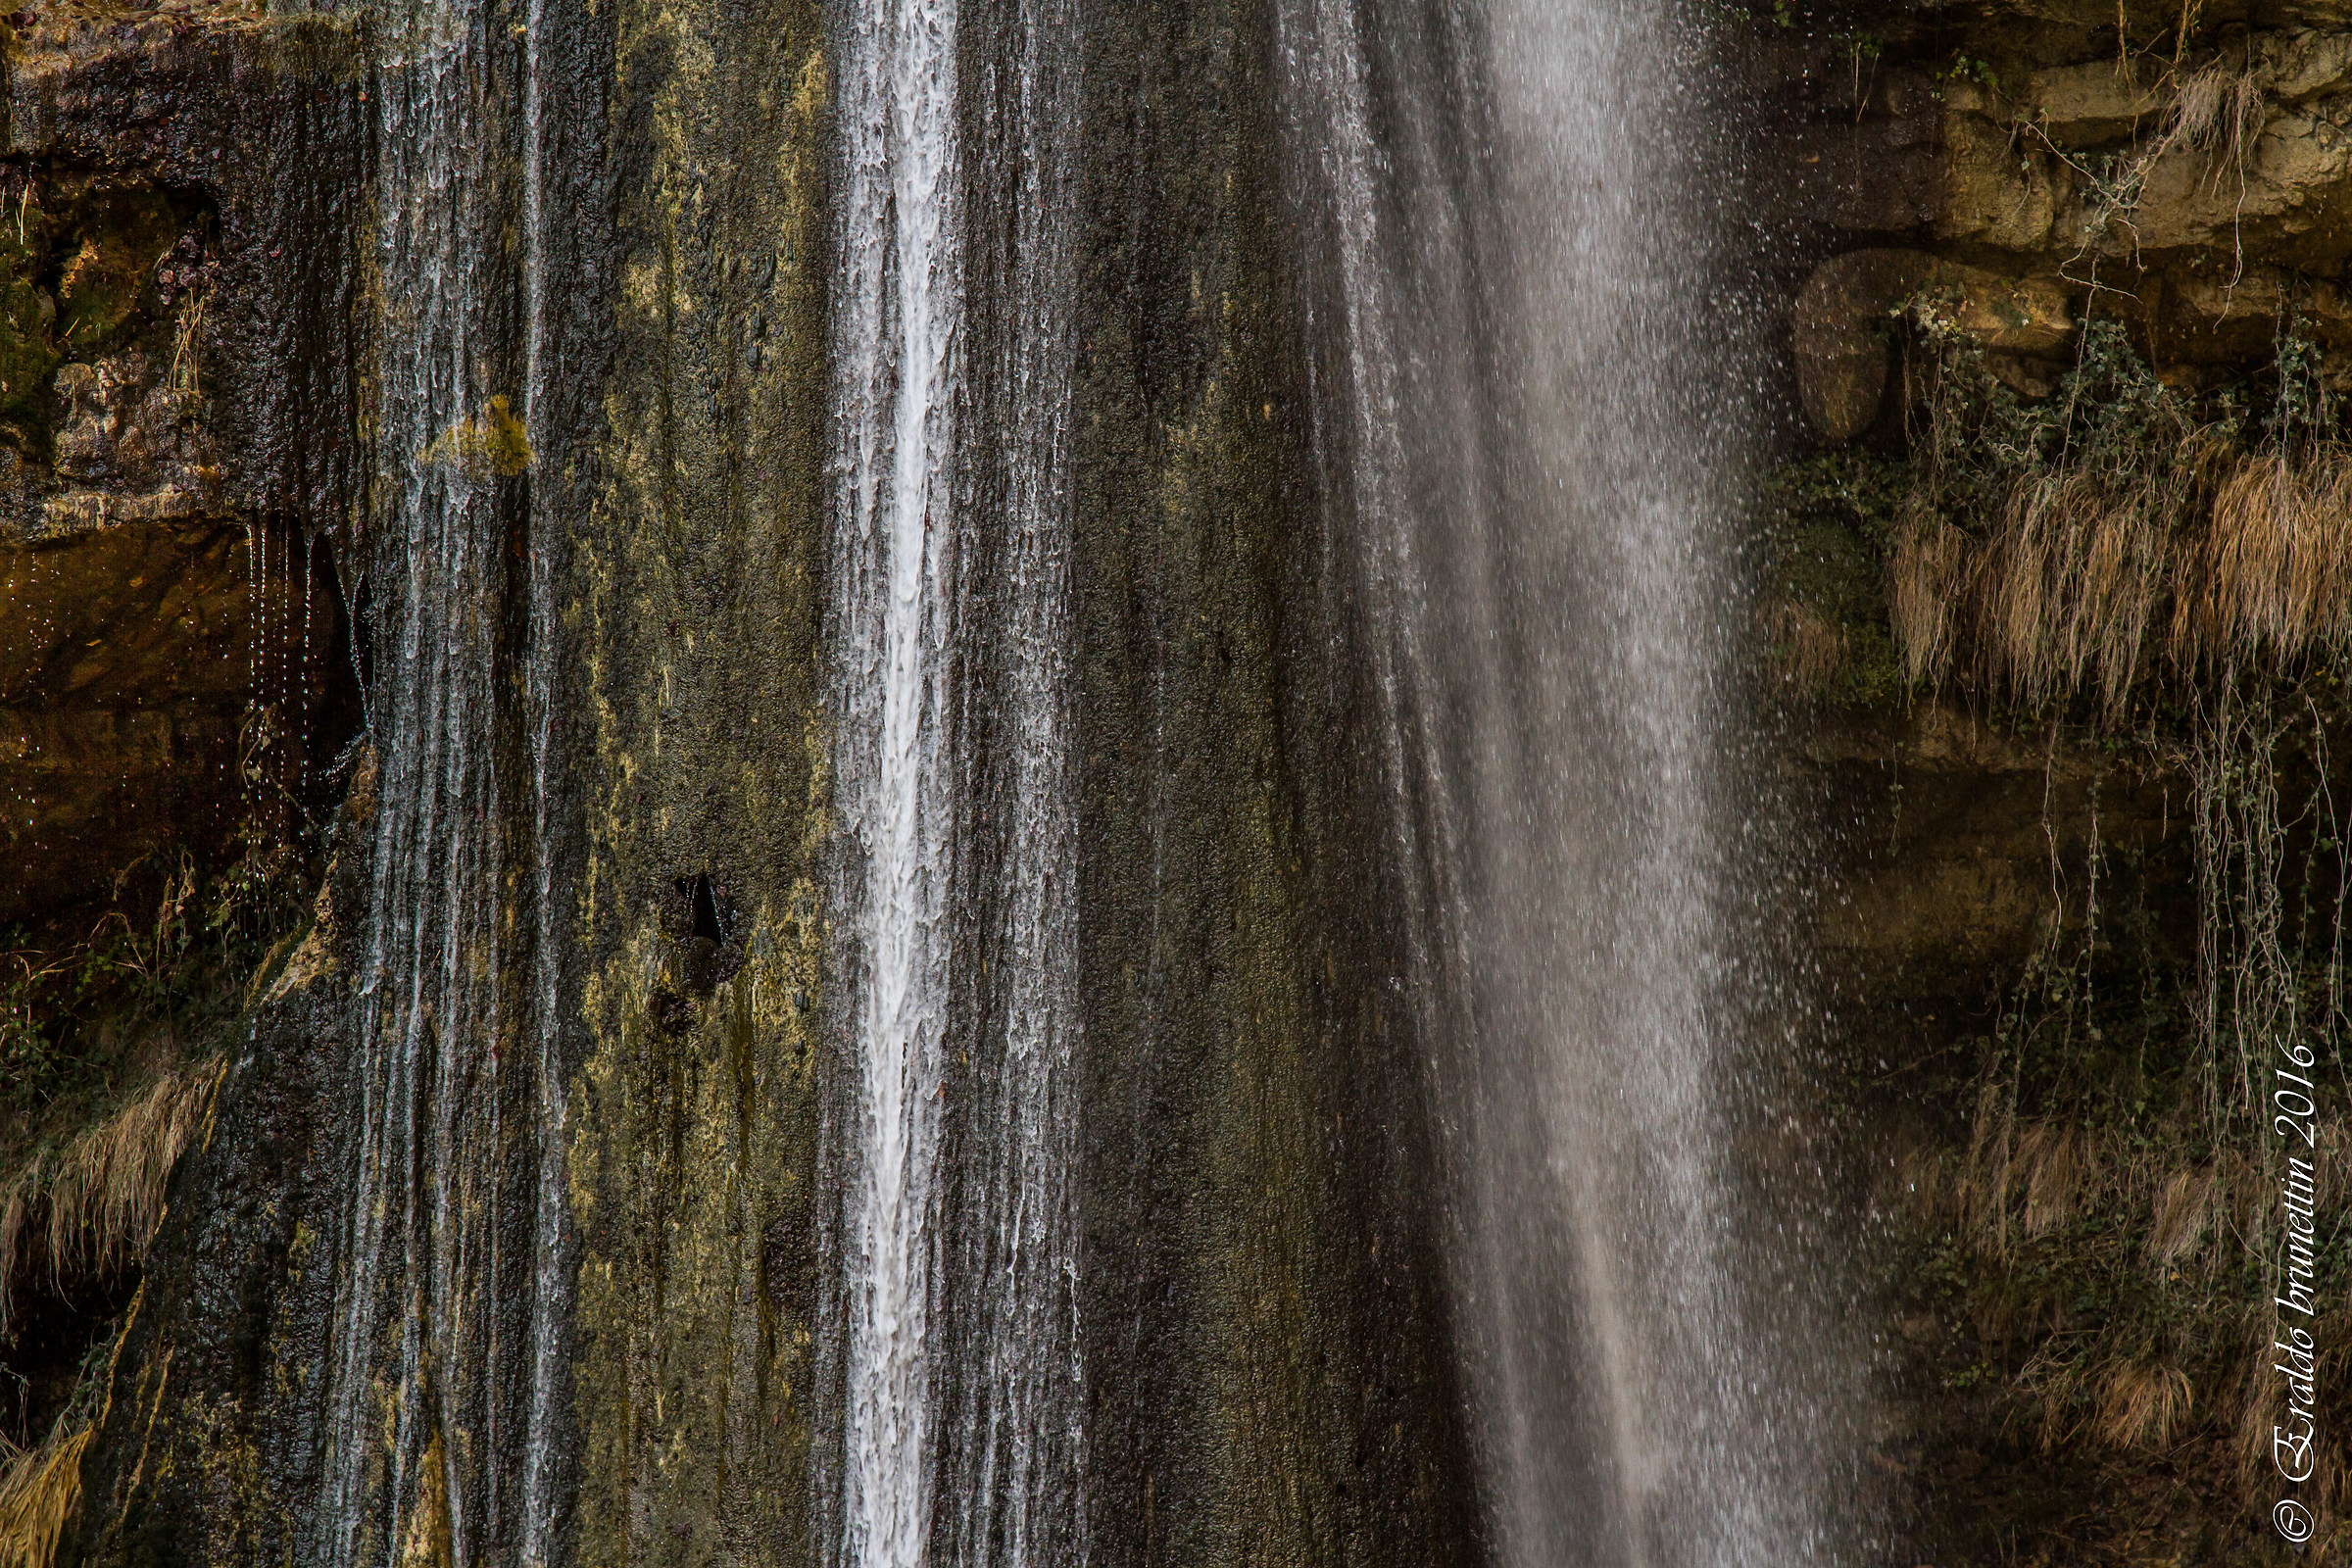 Stripes and colors from Salino waterfall....